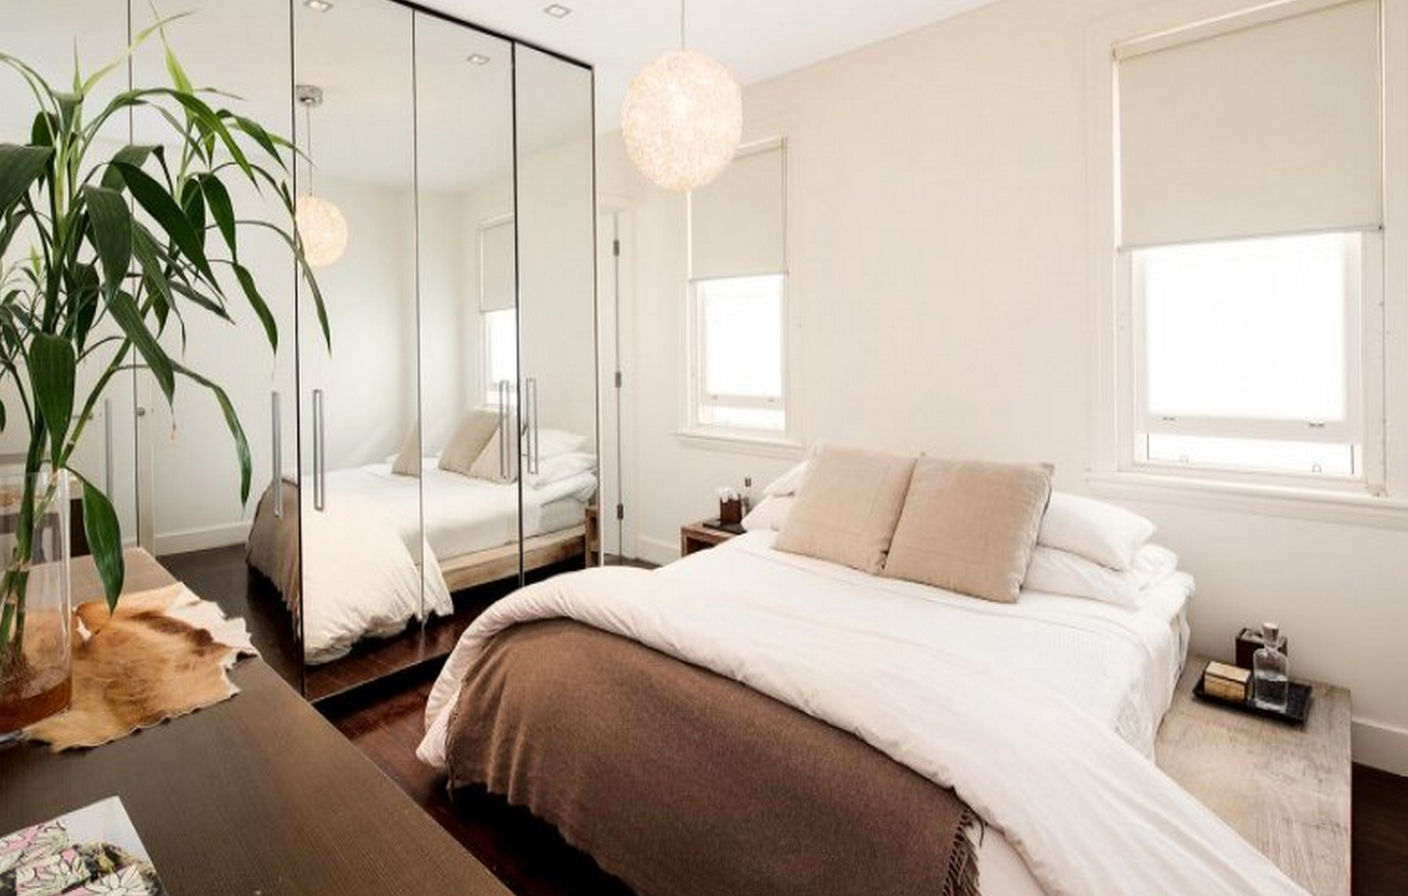 How to Use Mirrors to Make Your Small Space Look Bigger